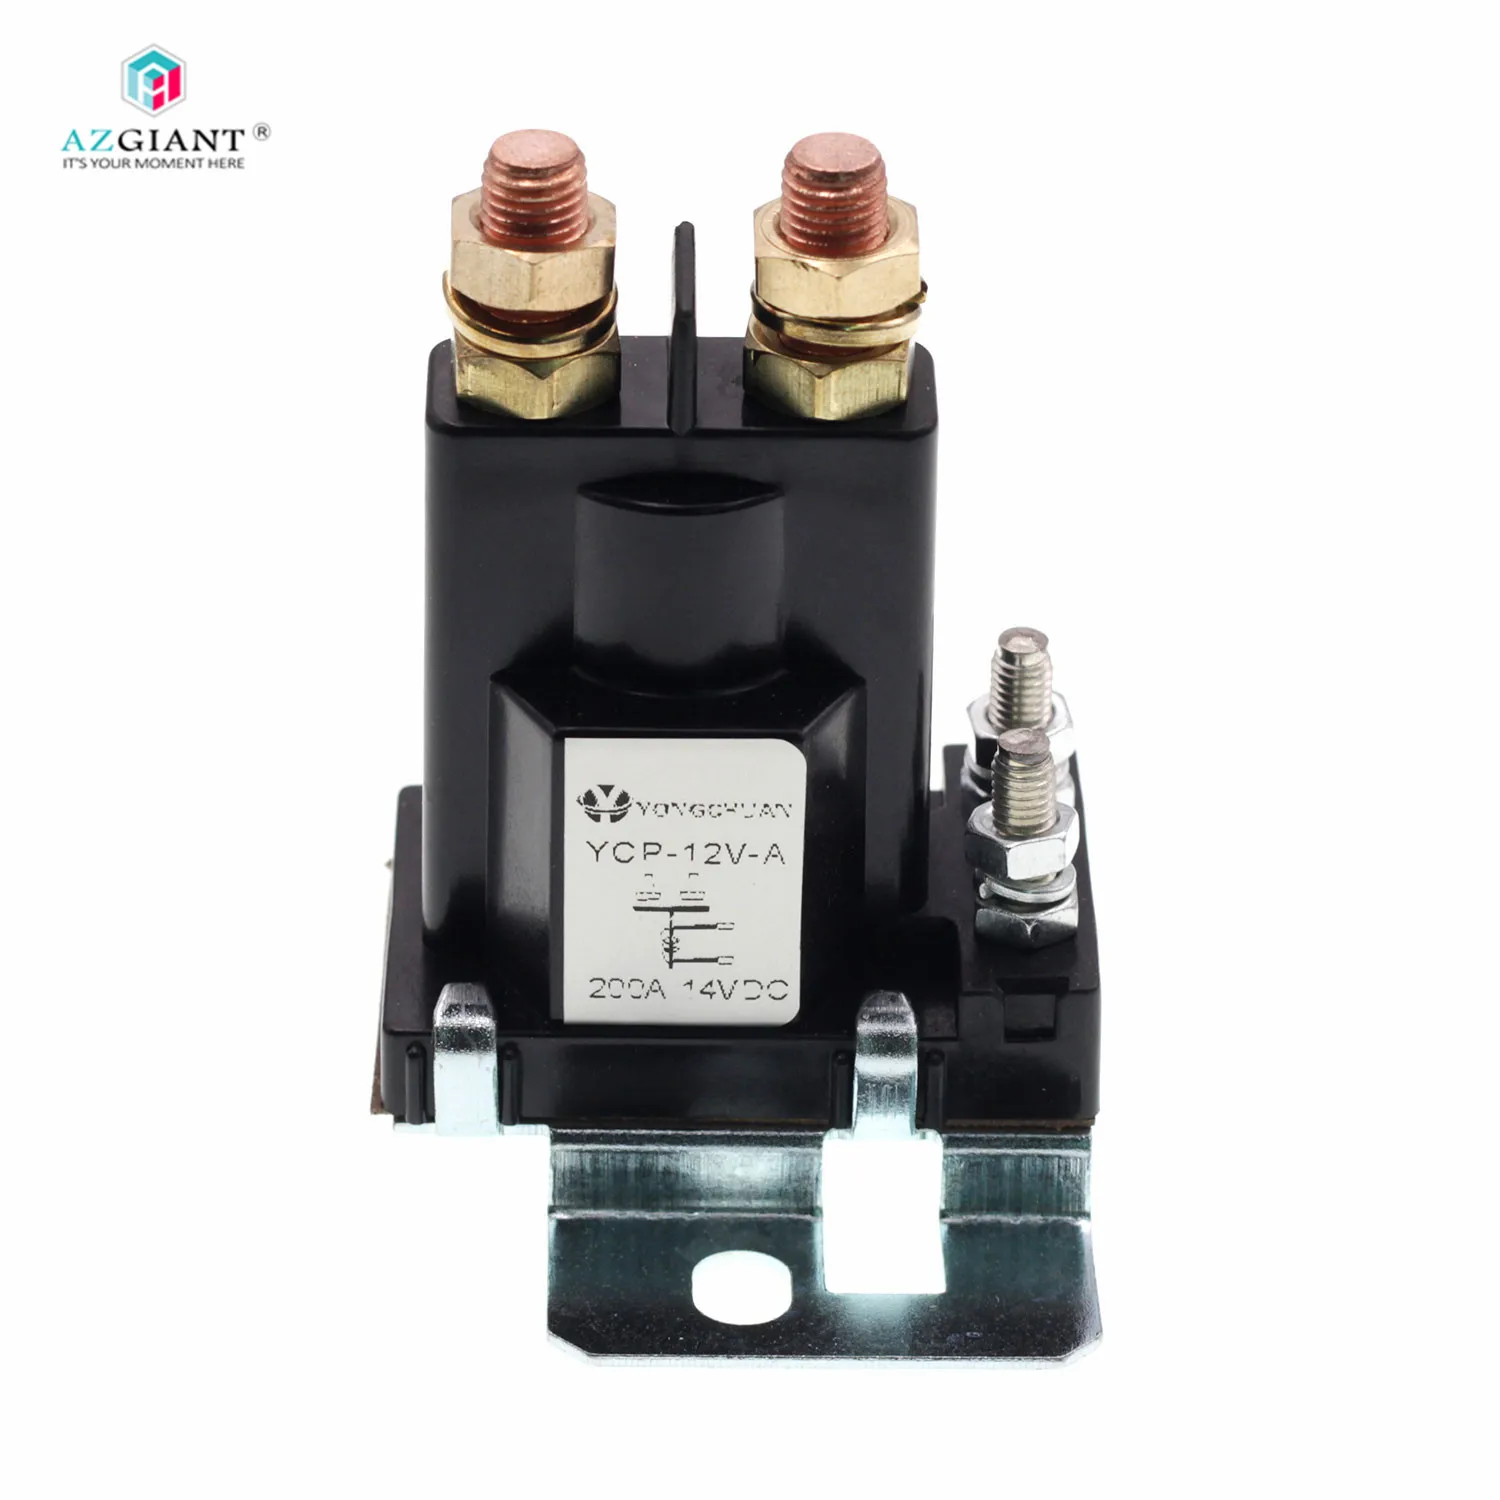 

Vehicle 12V 24V 200A high power current relay DC contactor modification switch copper terminal Car starter forklift excavator